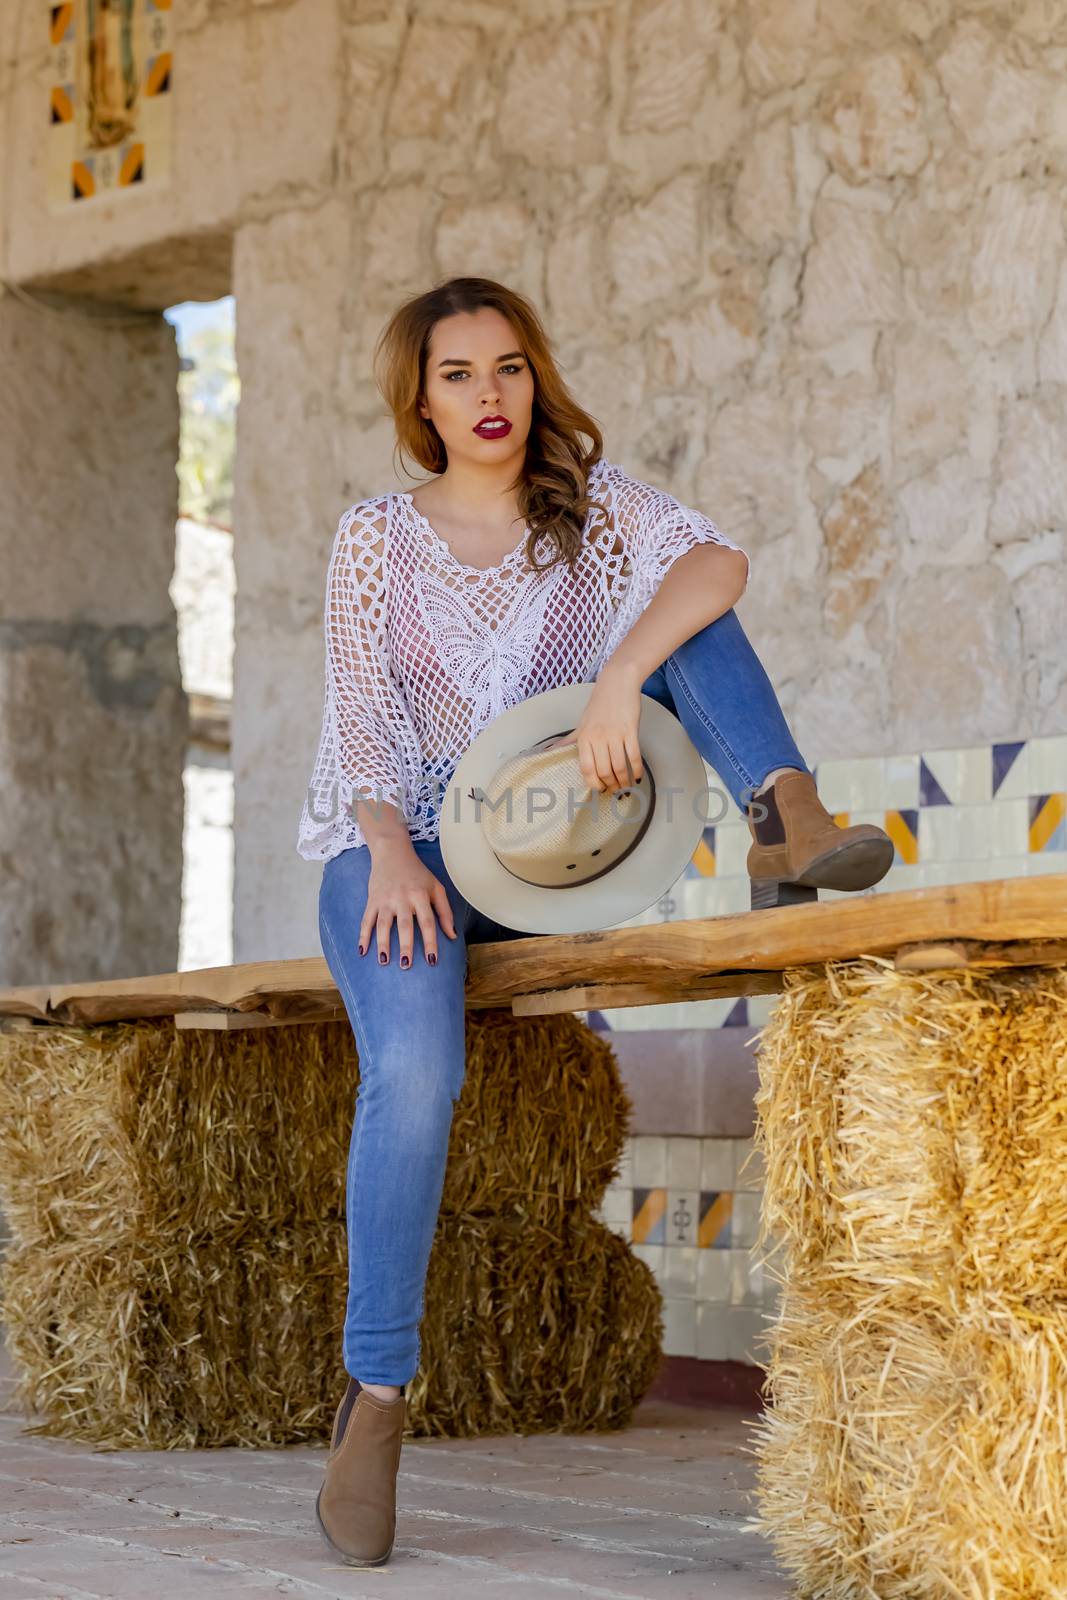 A gorgeous Hispanic Brunette model poses outdoors at a Mexican hacienda